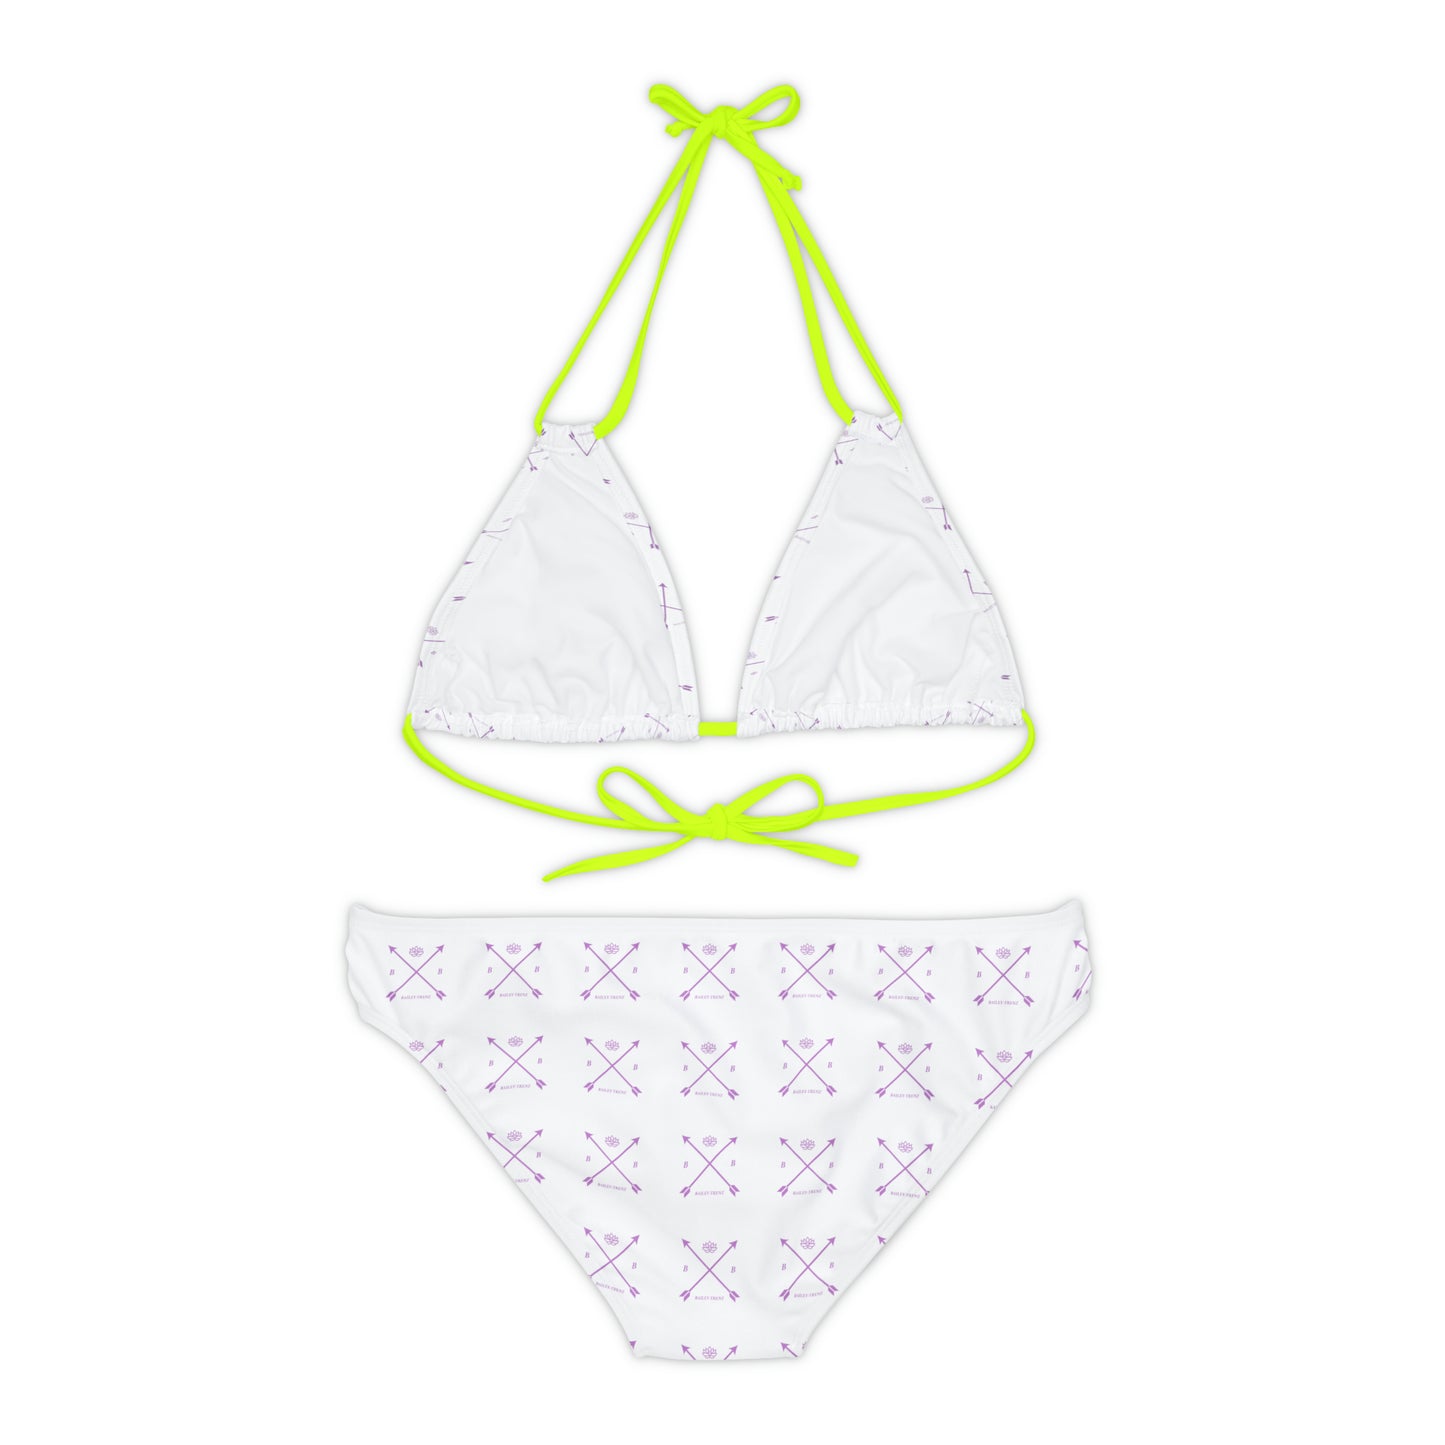 Bailey-Trenz Strappy Bikini Set - Your Canvas for Summer Style